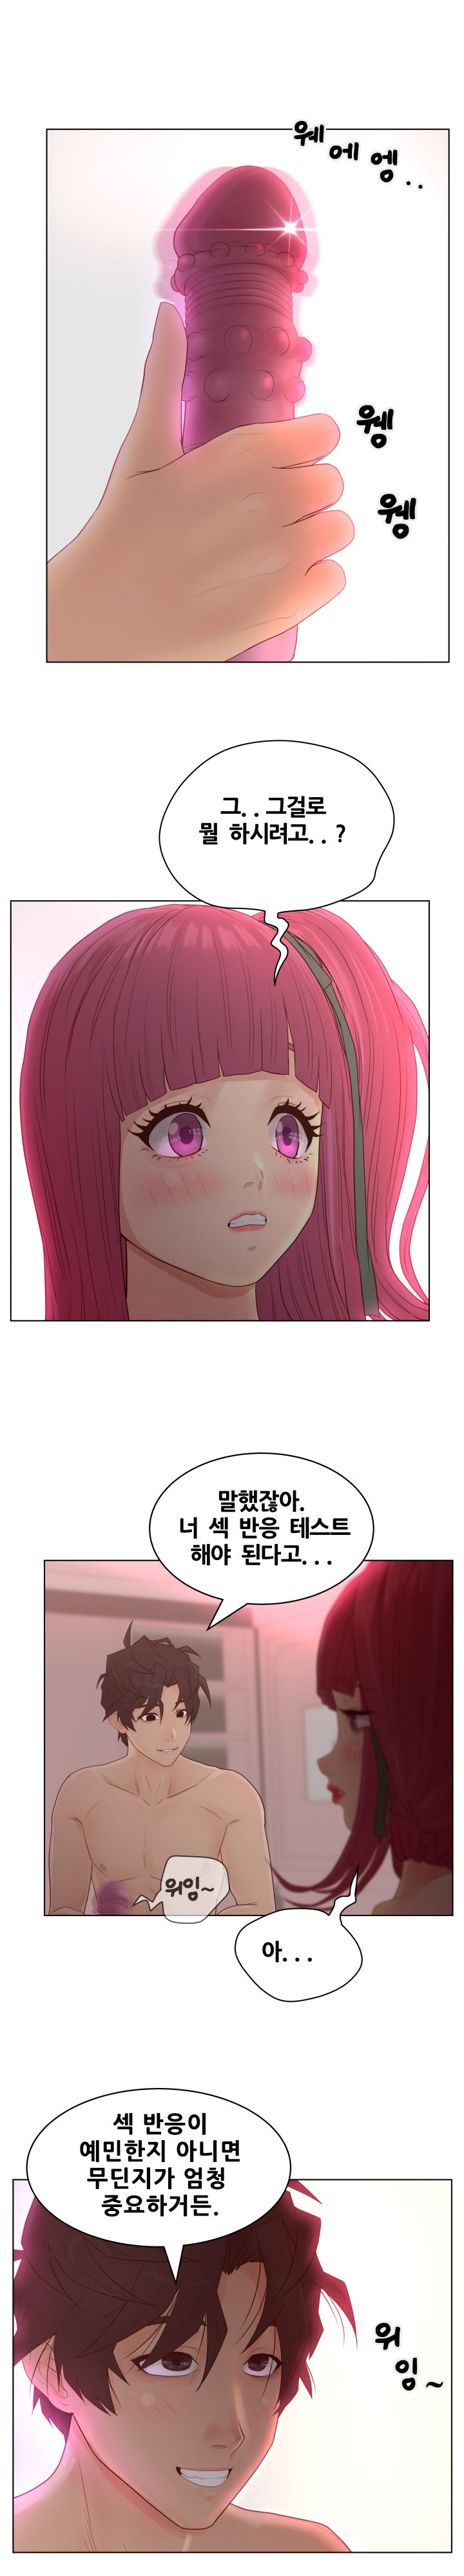 Share Girls Raw - Chapter 14 Page 2